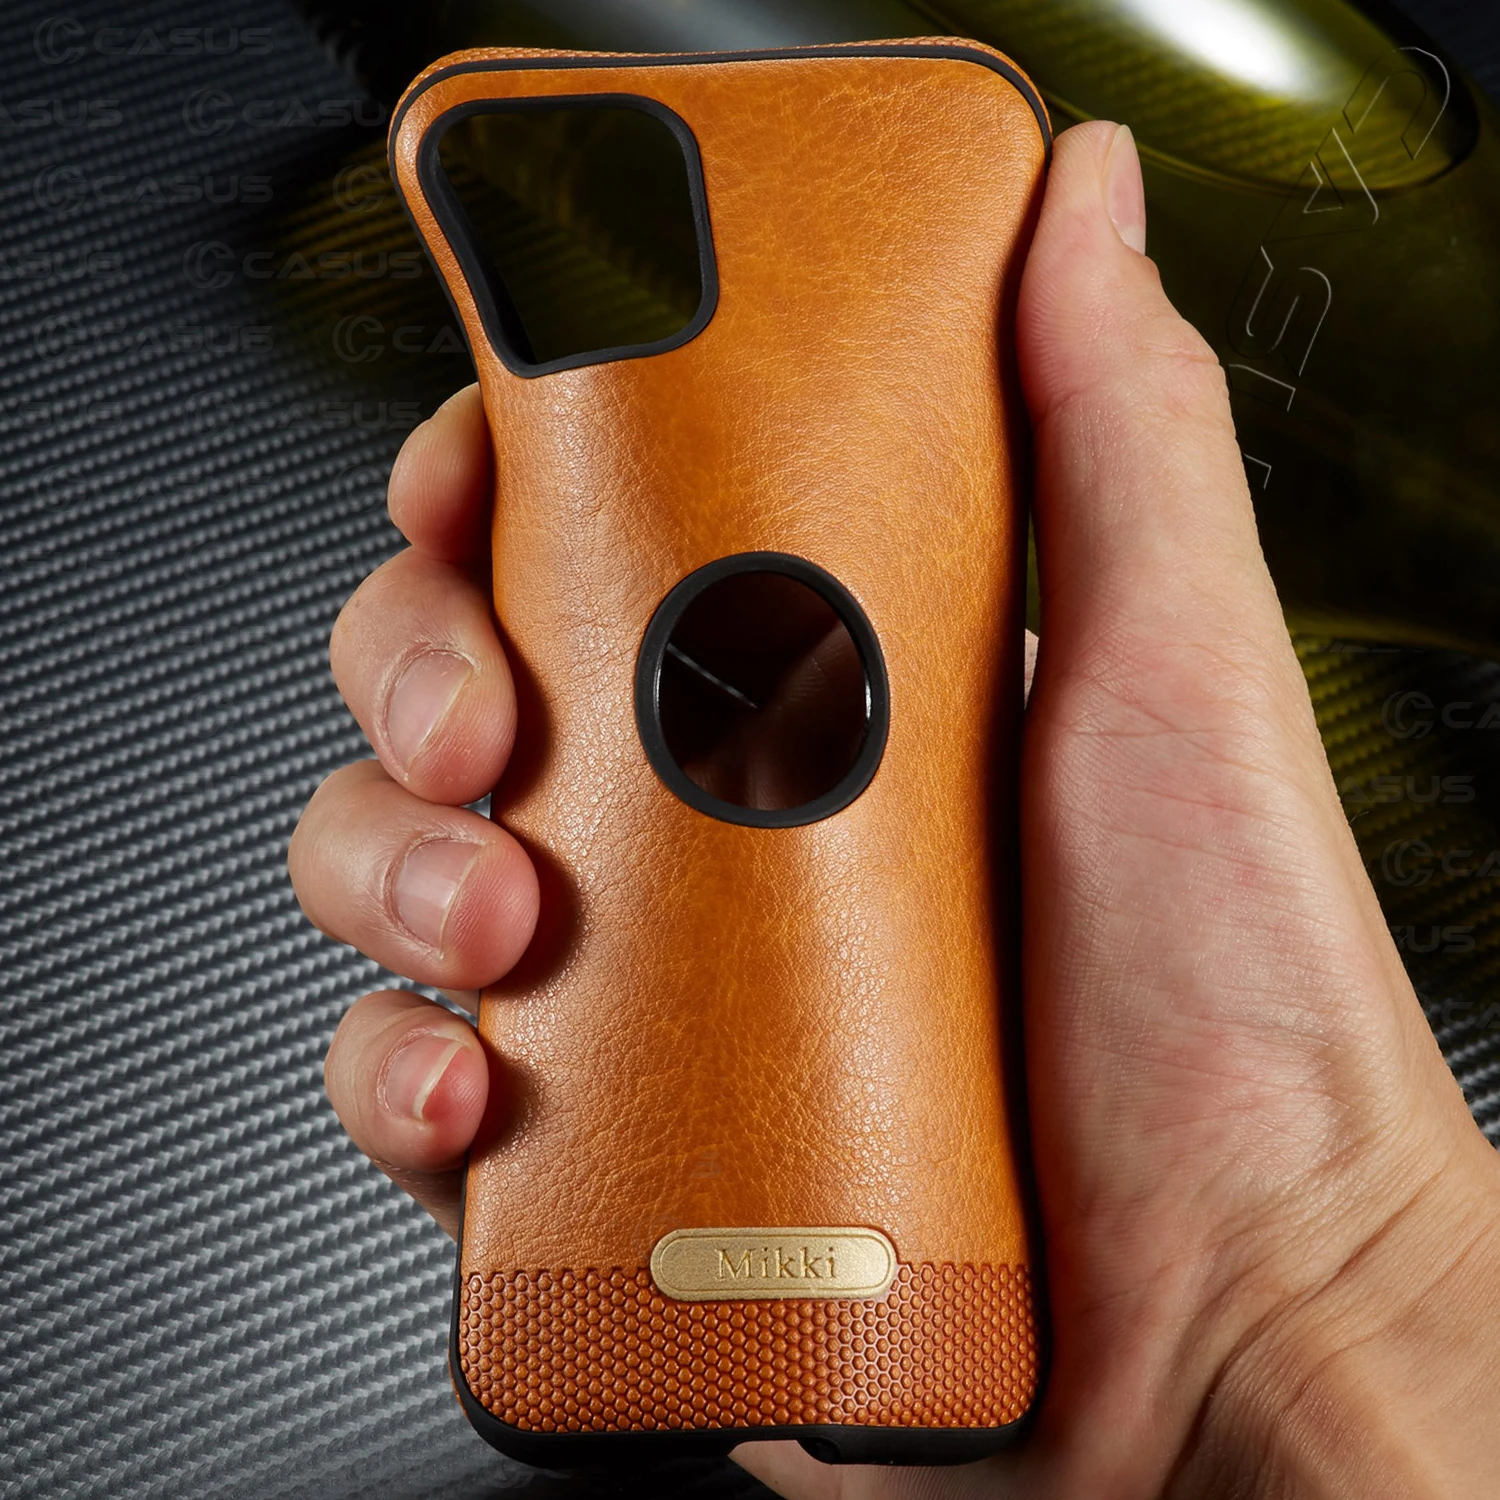 For iPhone 11 11 Pro 11 Pro Max Case Luxury Leather Back Ultra Thin Case Cover for iPhone XS MAX XR Xs X 8 8Plus 7 7Plus Case